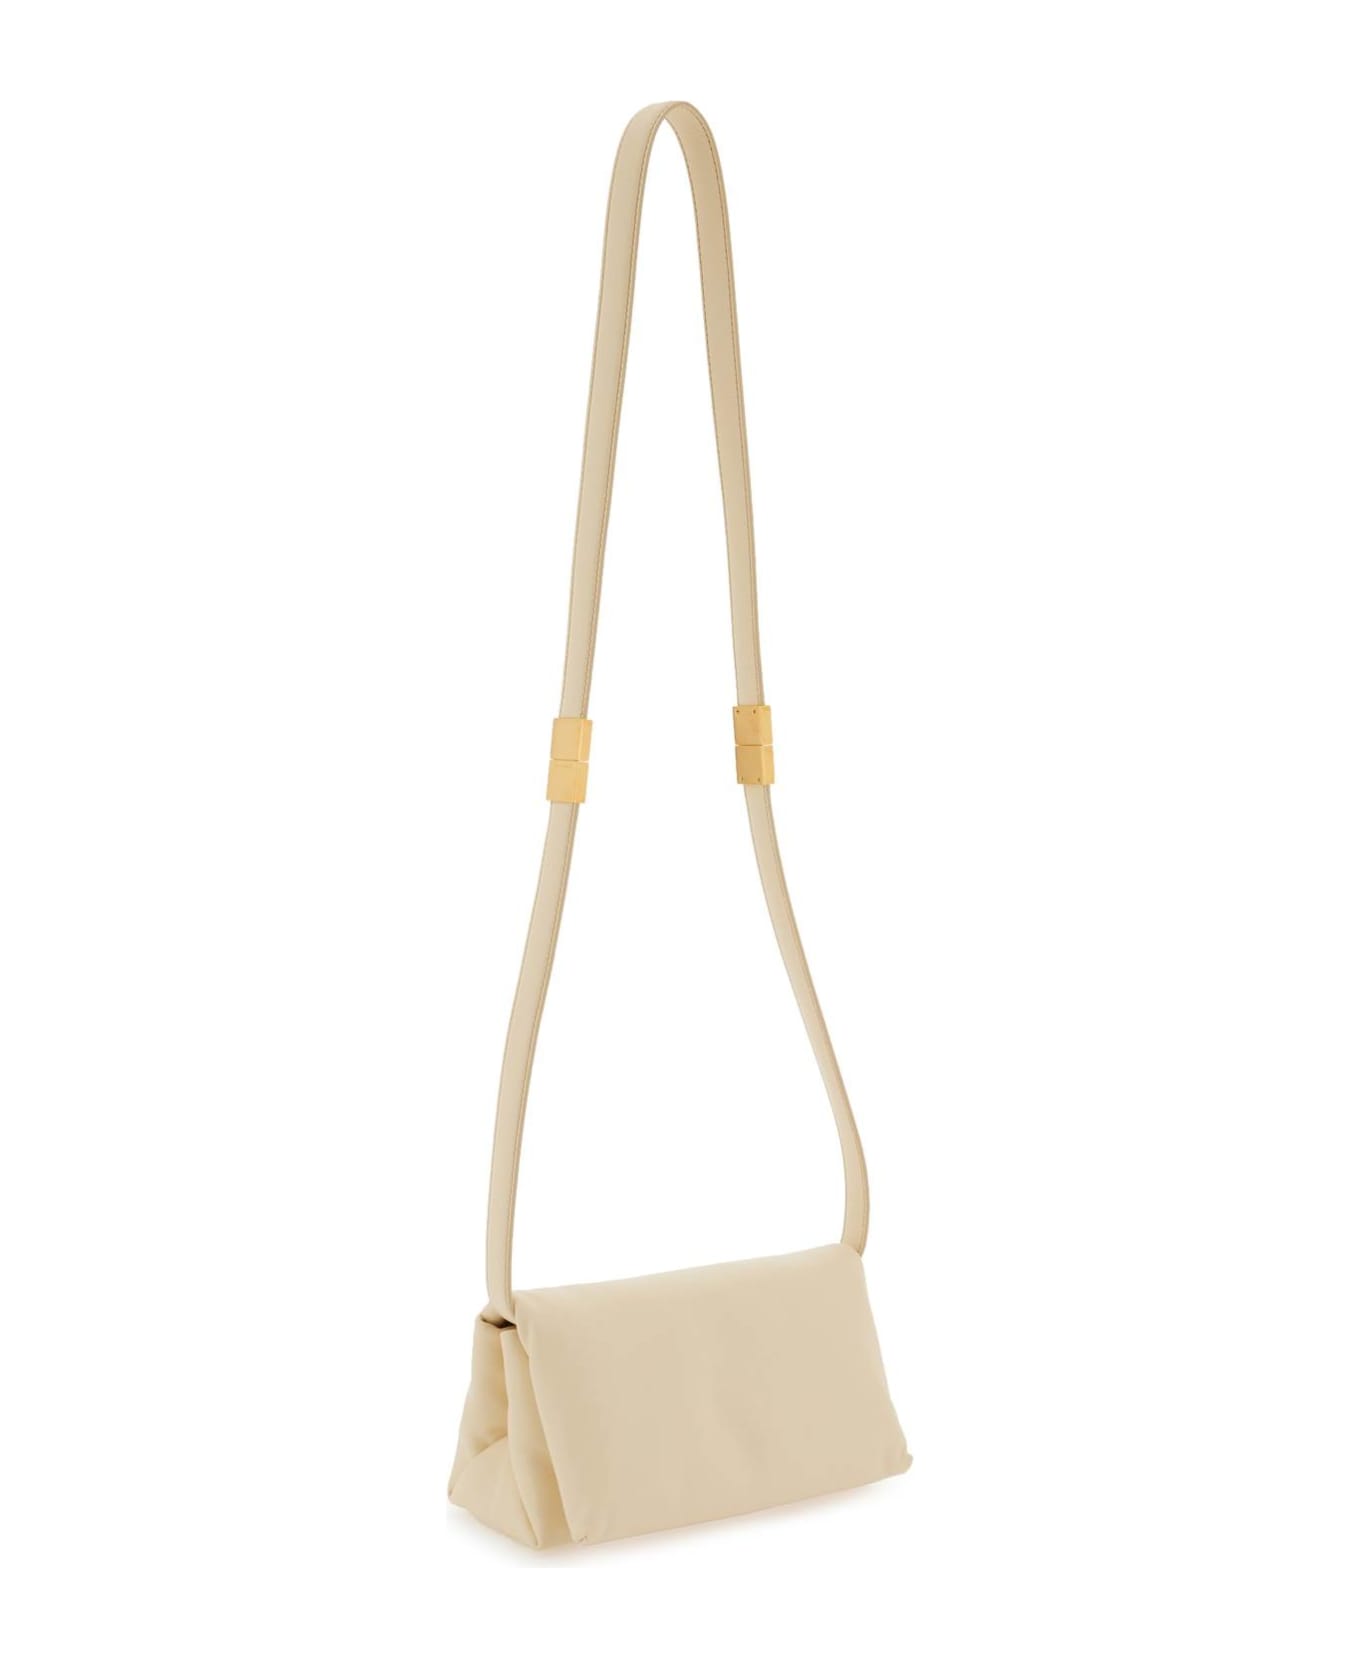 Marni Small Prisma Bag In Ivory Leather - IVORY